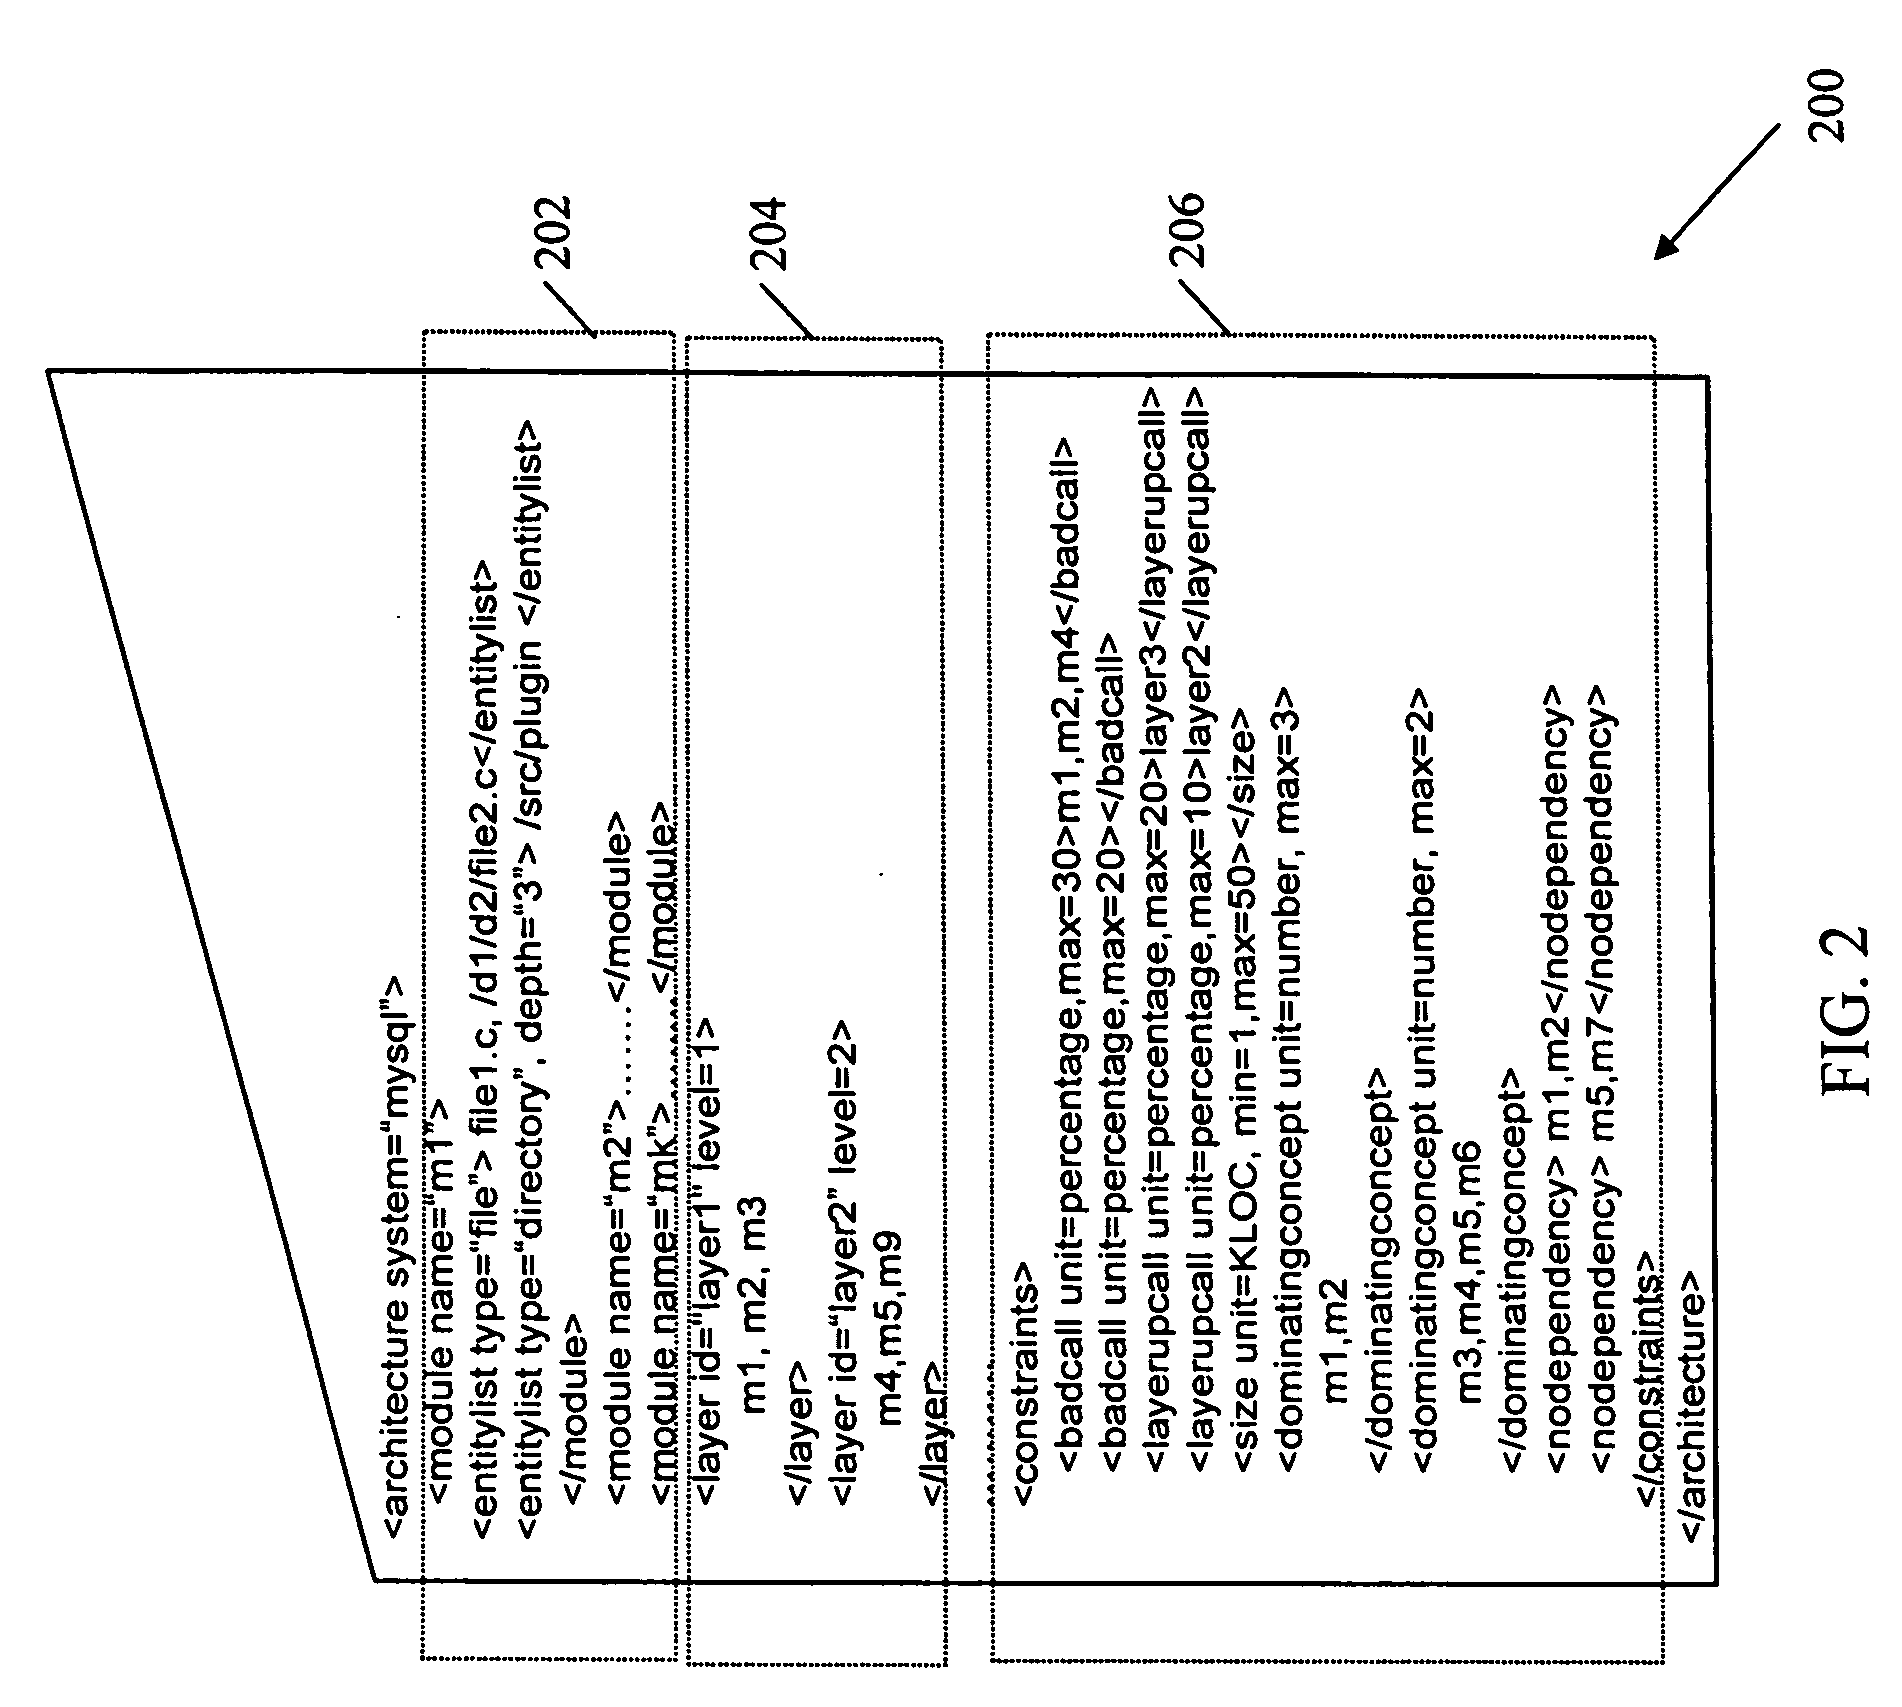 System and method for improving modularity of large legacy software systems